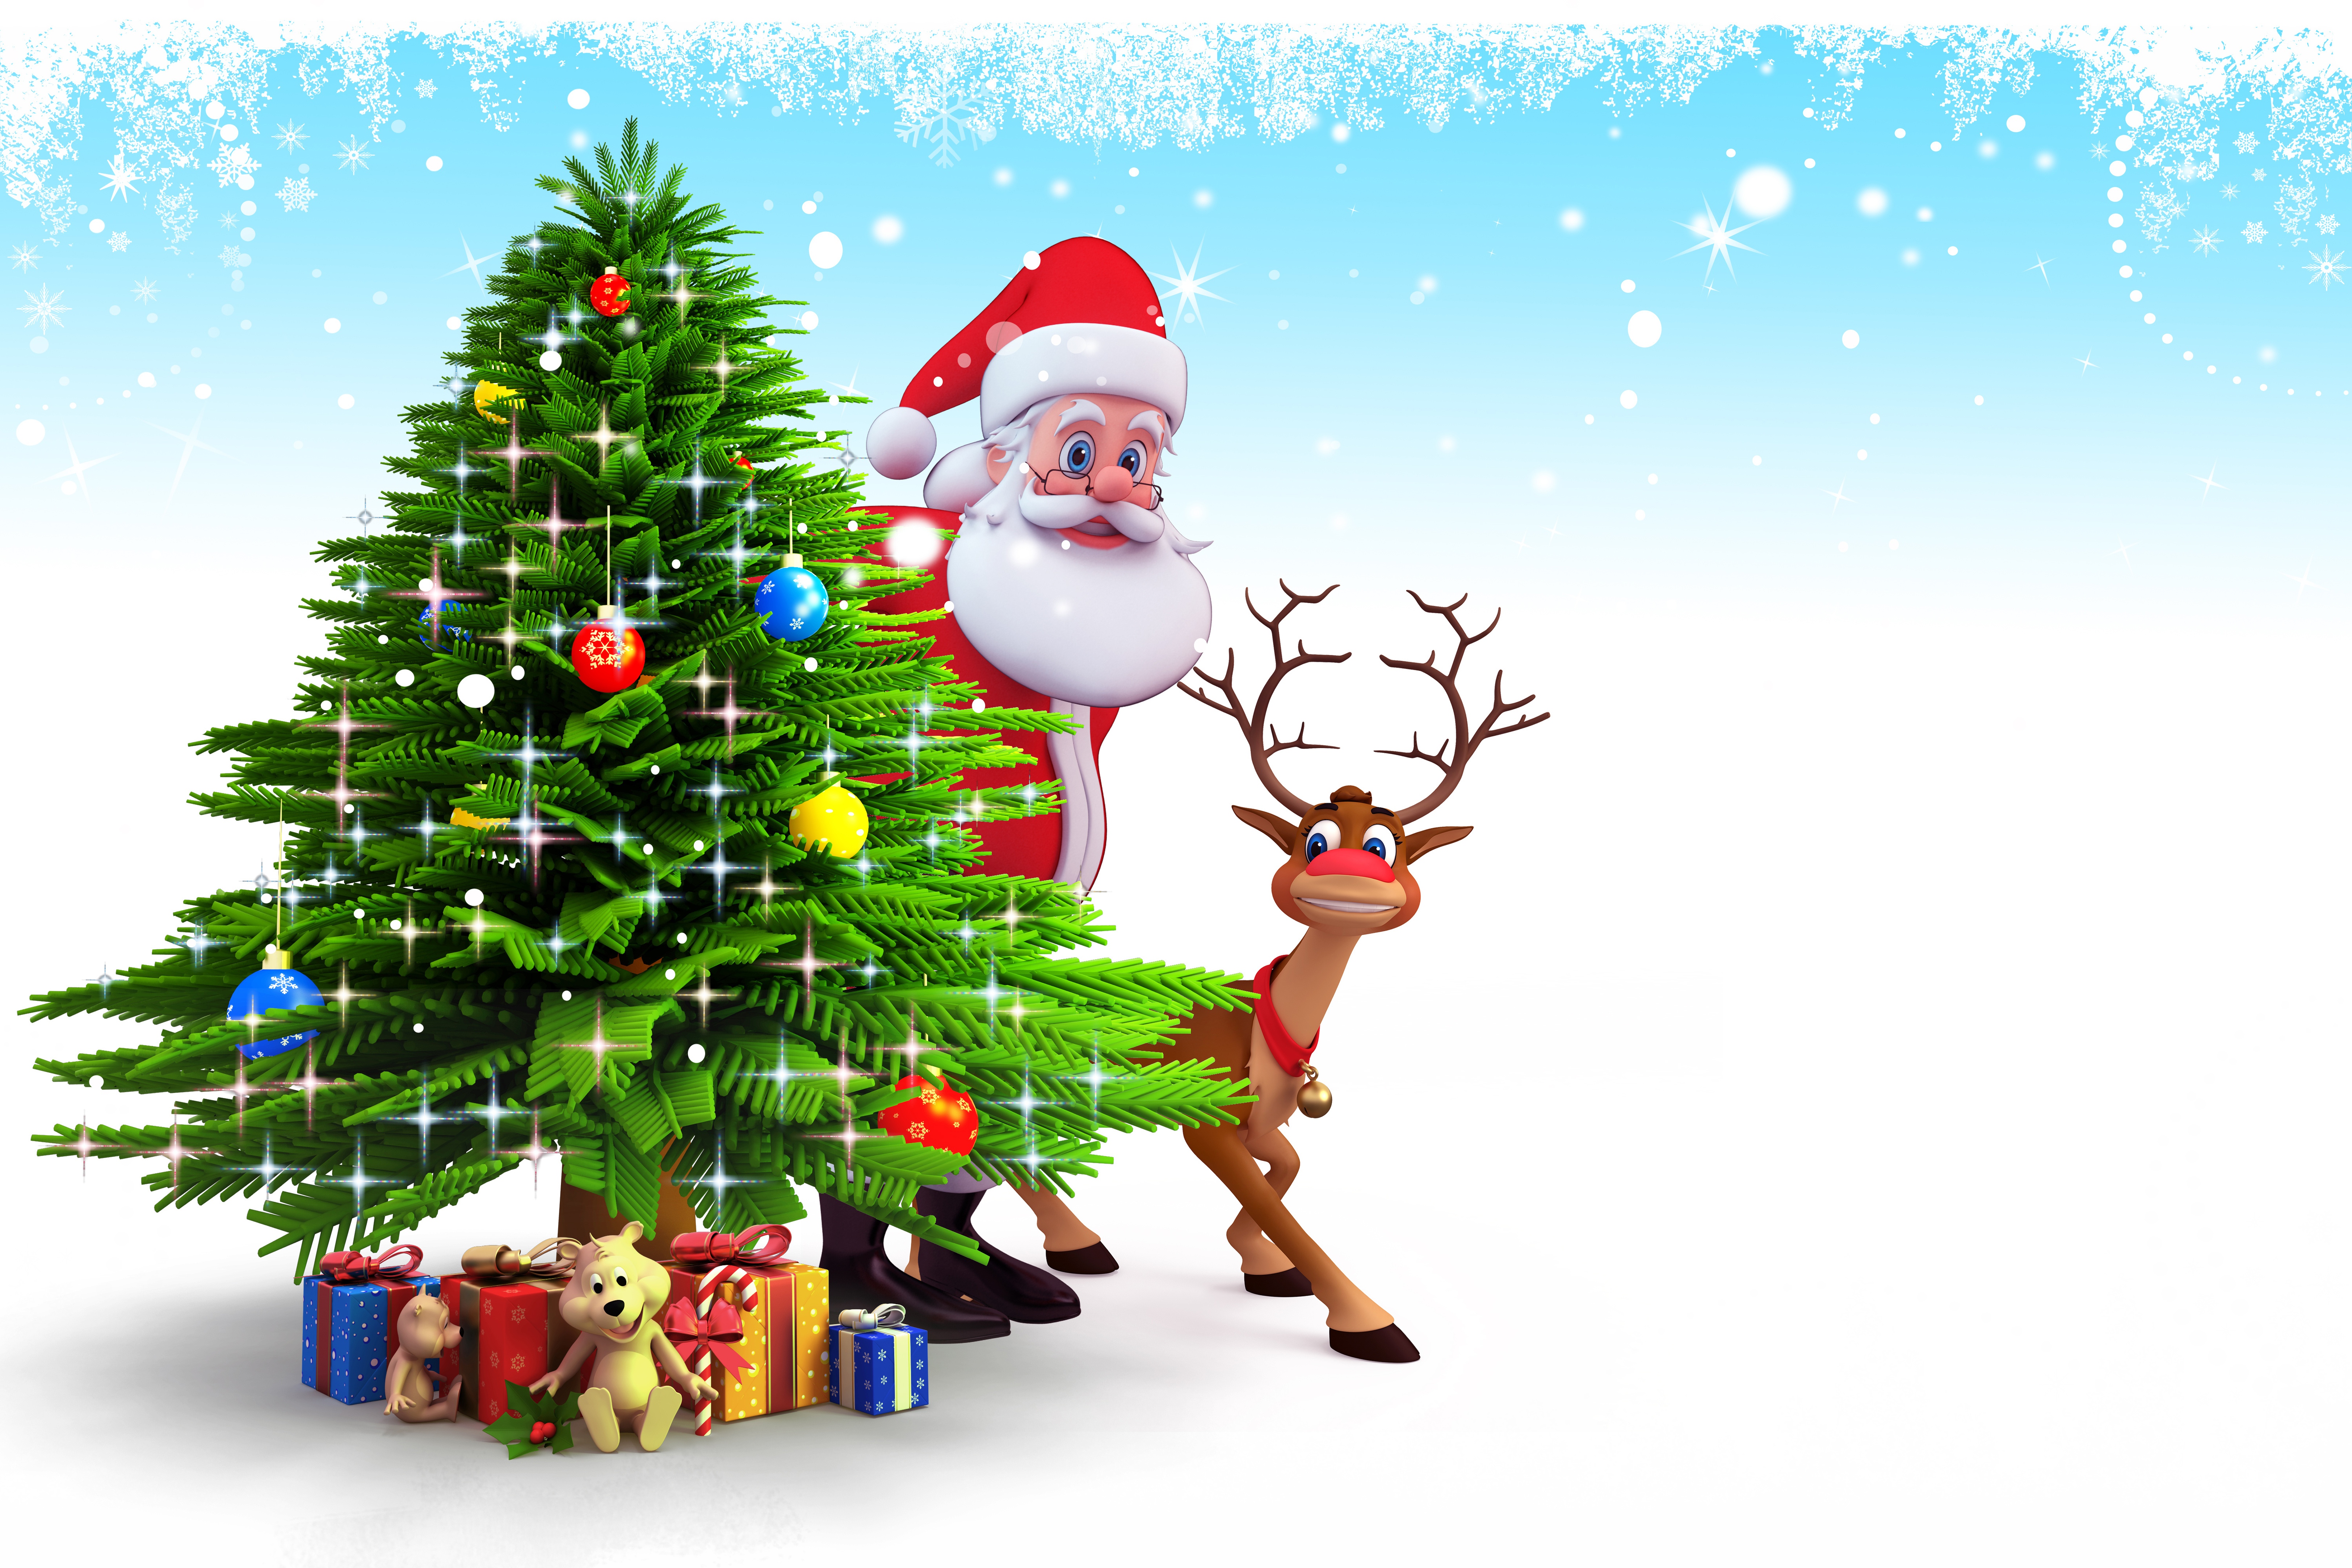 Free download Merry Christmas Backgrounds Hd Wallpapers Mac